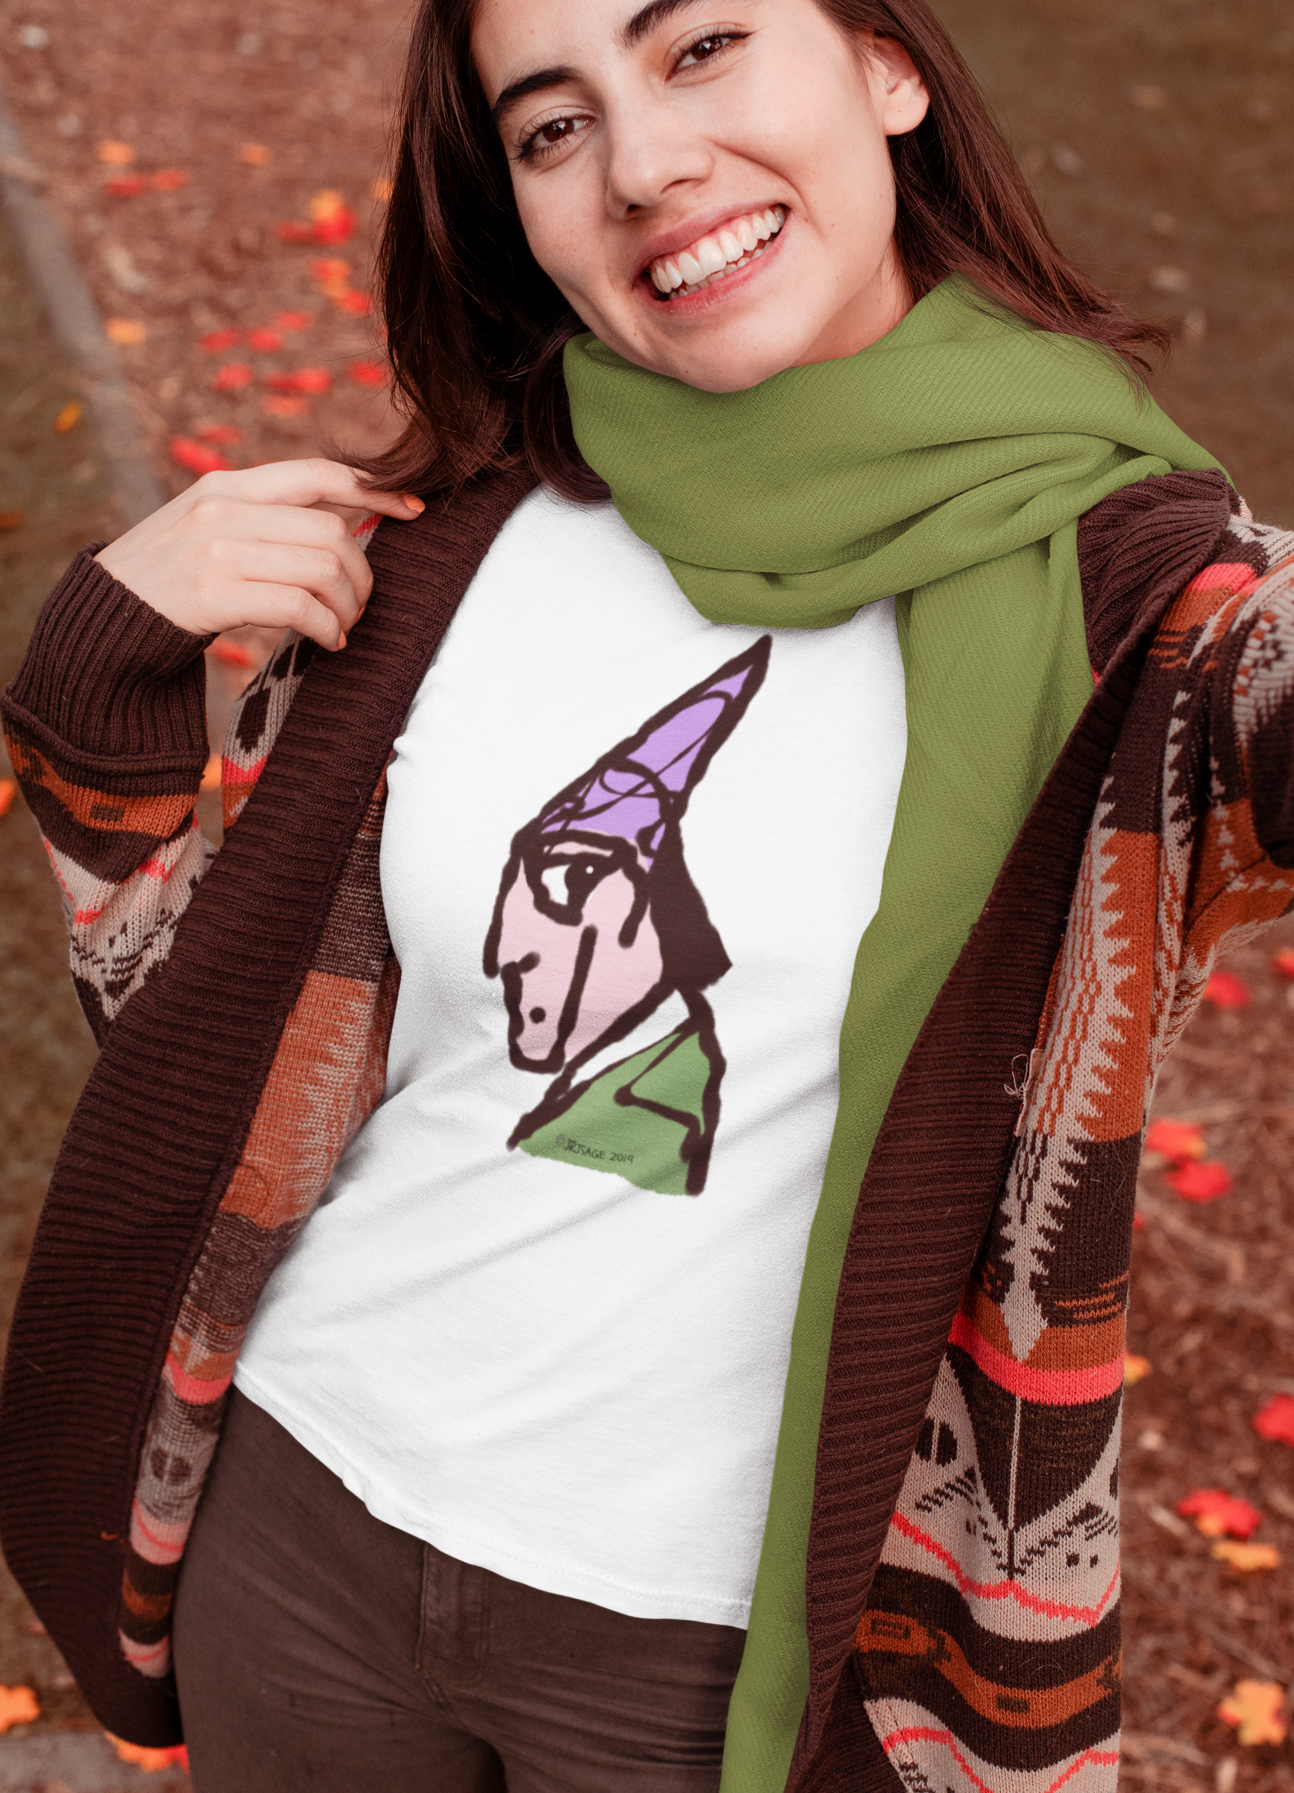 Wizard T-shirt - Young woman outside wearing a illustrated magical wizard t-shirt in mid heather grey colour vegan cotton by Hector and Bone